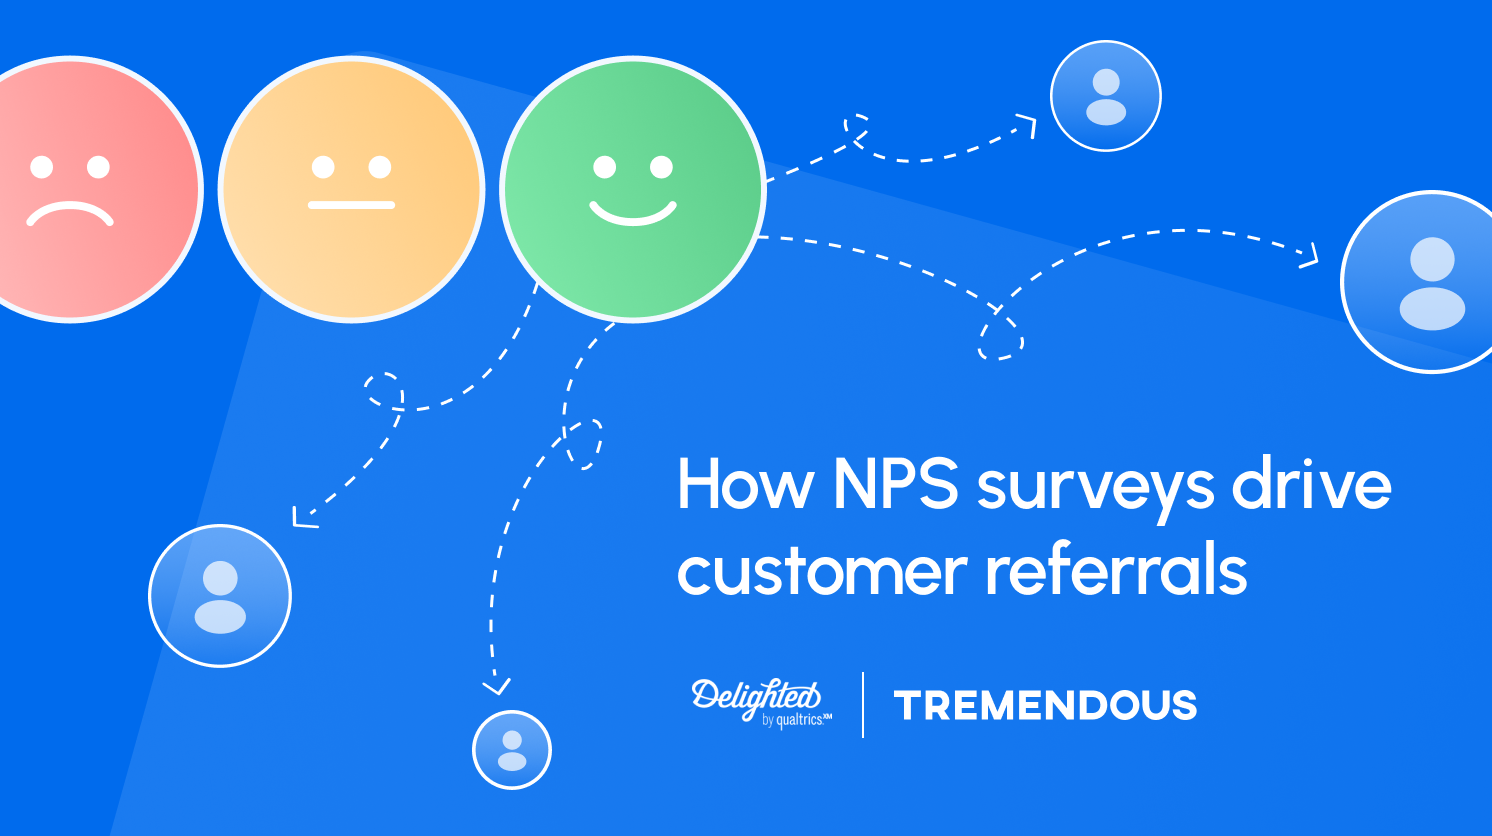 How to use NPS surveys to drive customer referrals